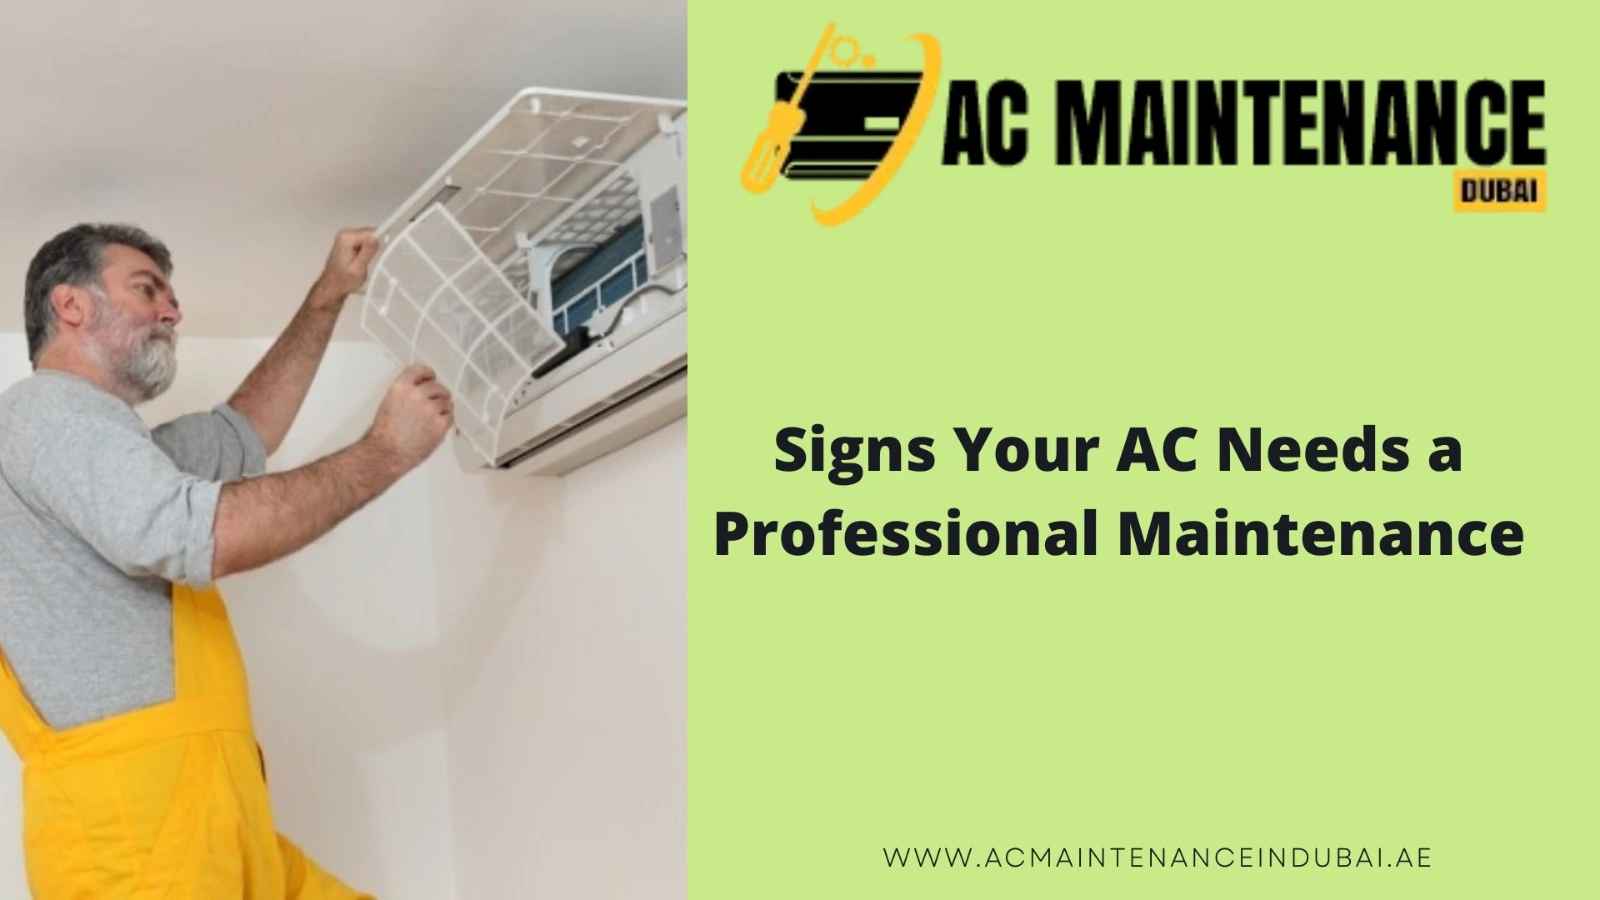 Signs Your AC Needs a Professional Maintenance